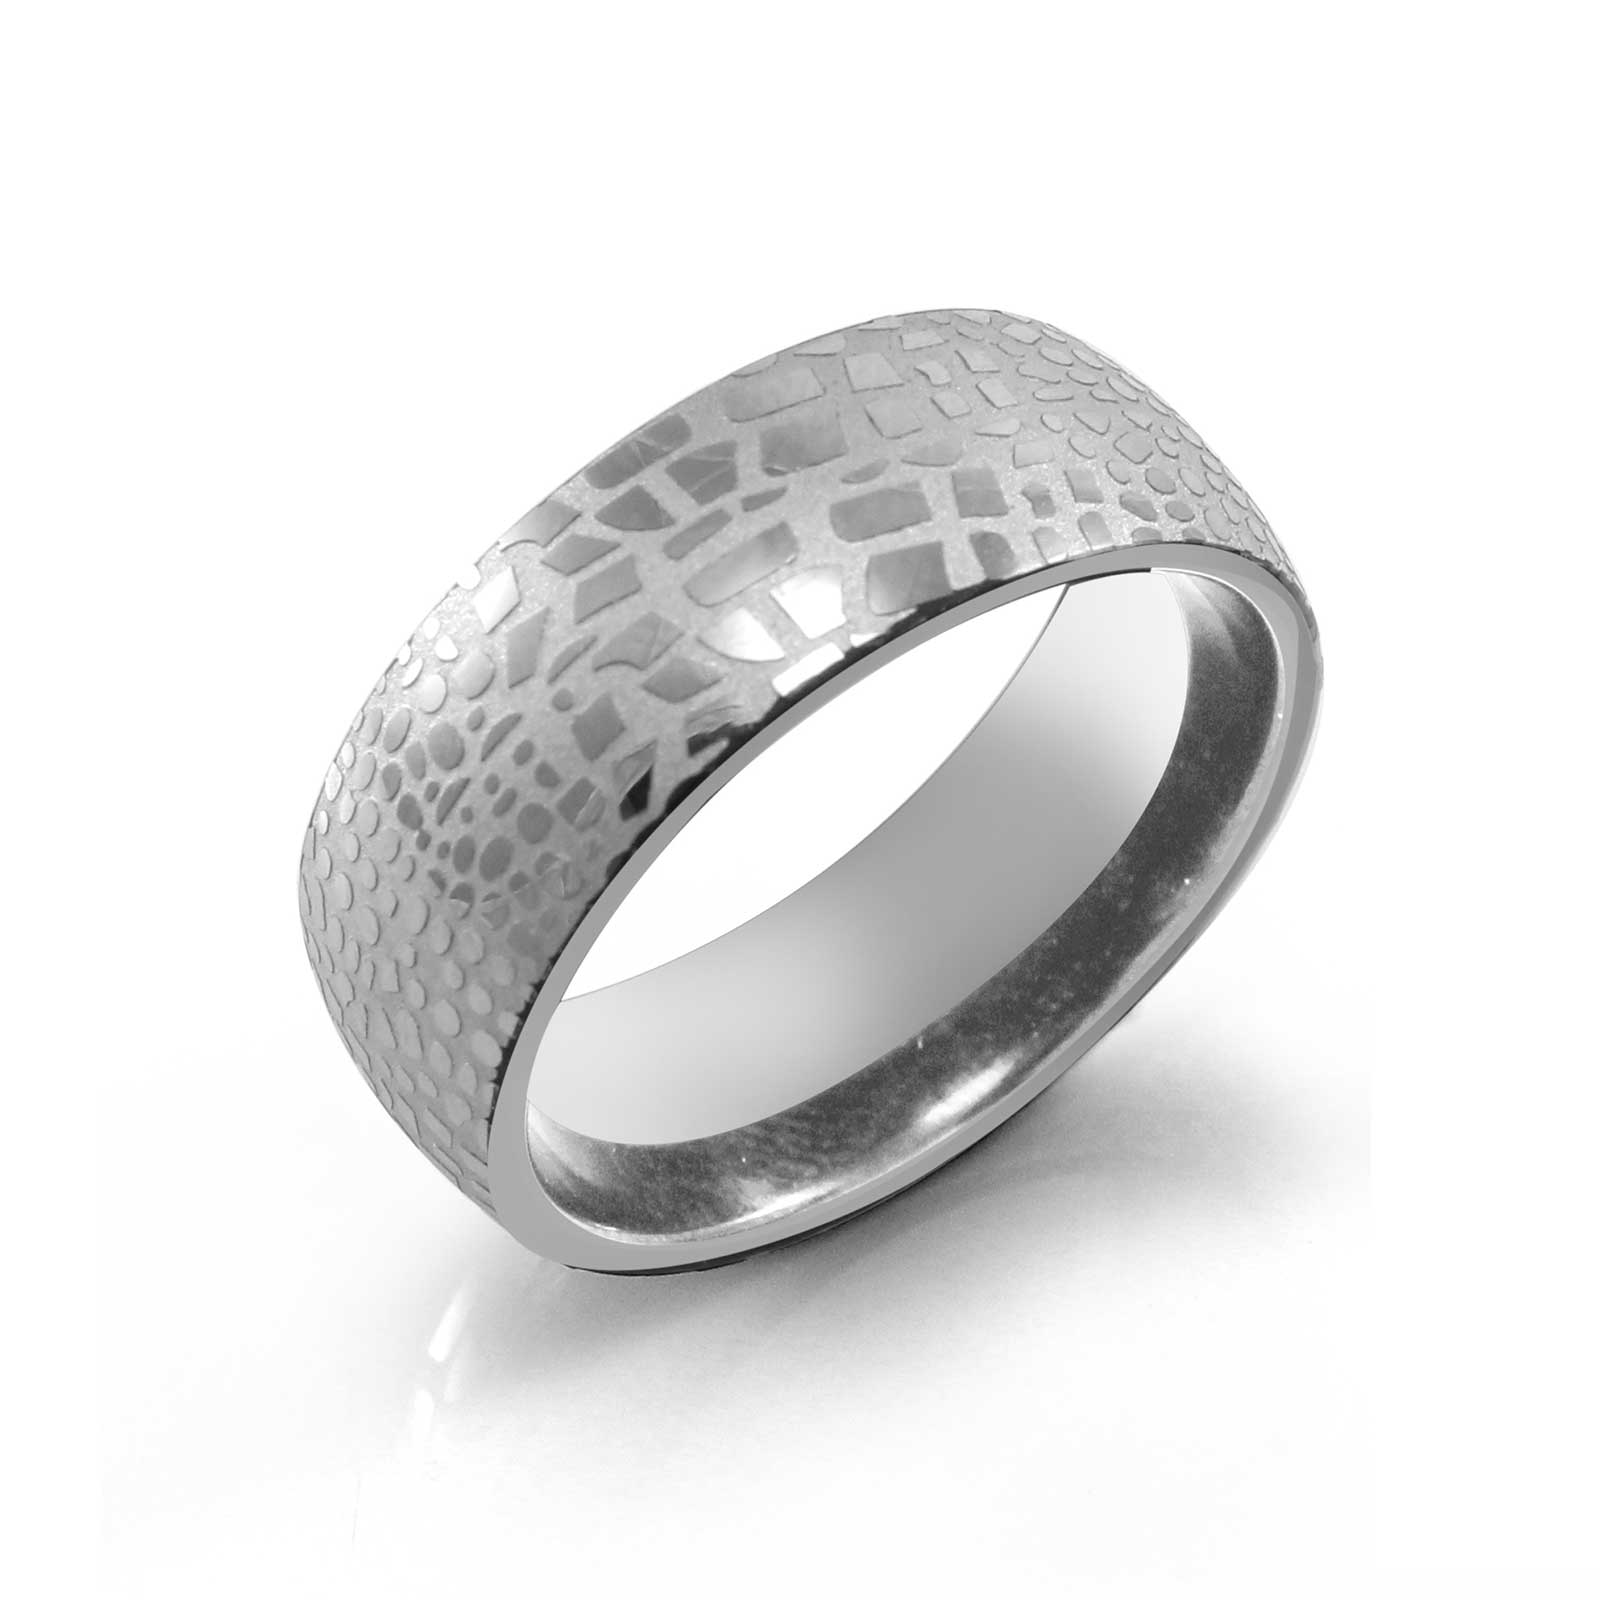 MNR-043T-A Stainless Steel Fashion Ring